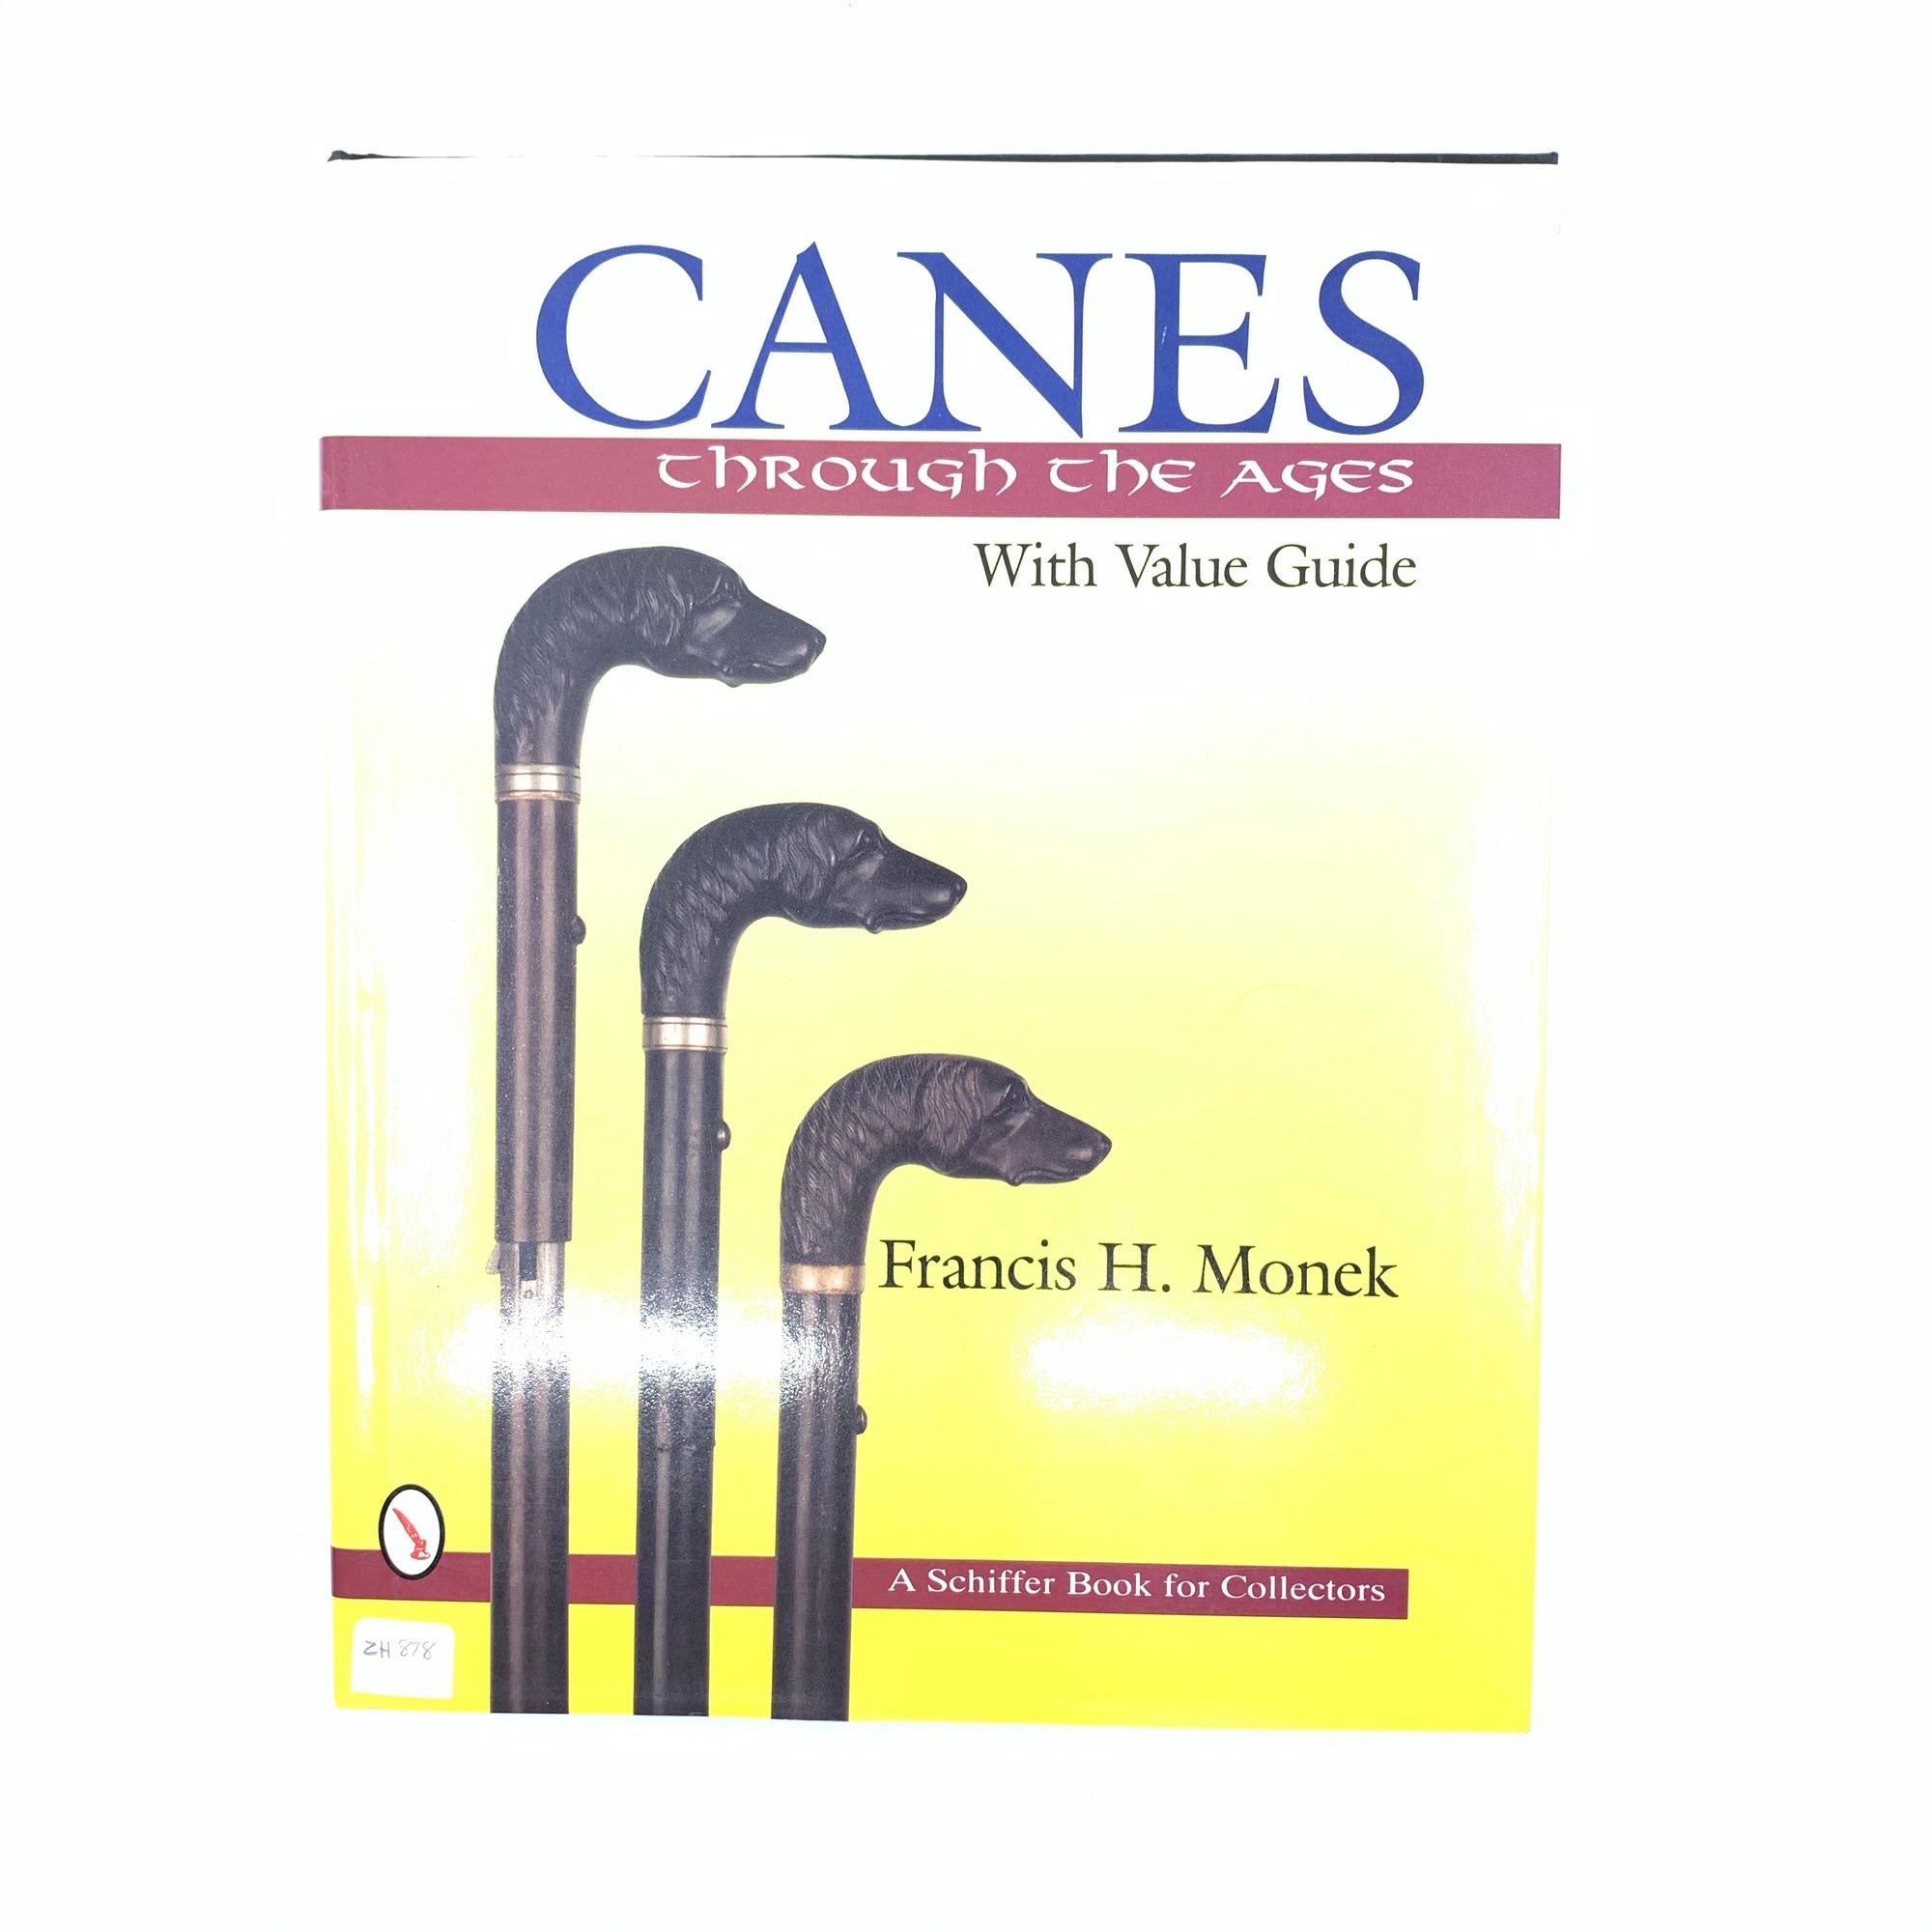 Canes Through the ages with Value Guyide HC 320 pgs by Francis H. Monek